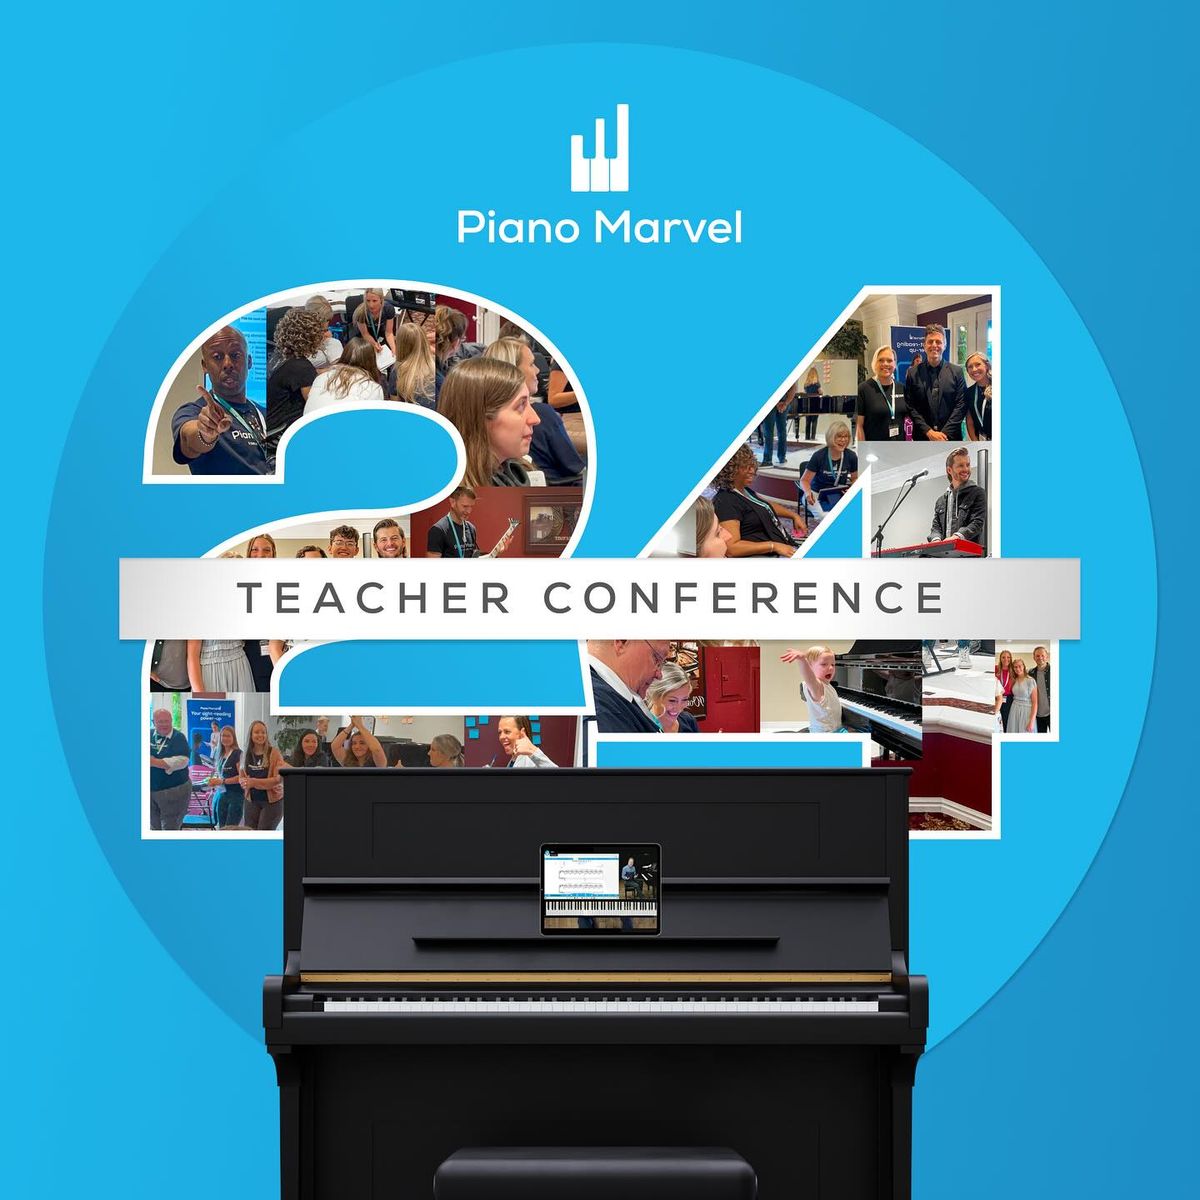 Piano Marvel Teacer Conference